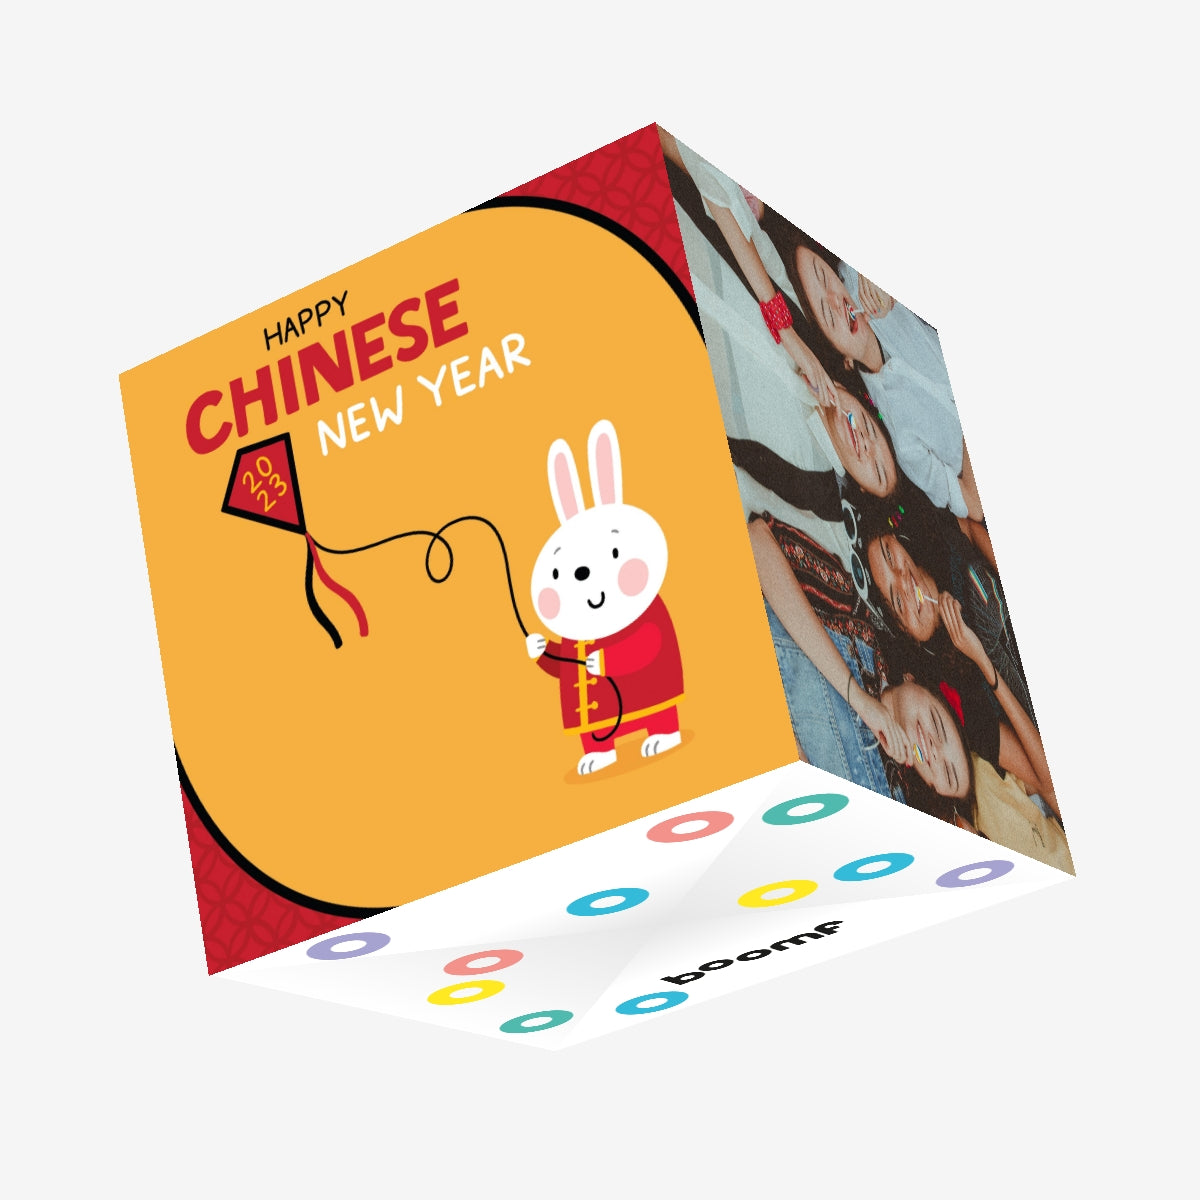 Chinese New Year Greetings - Happy Chinese New Year by Malaysia Brands